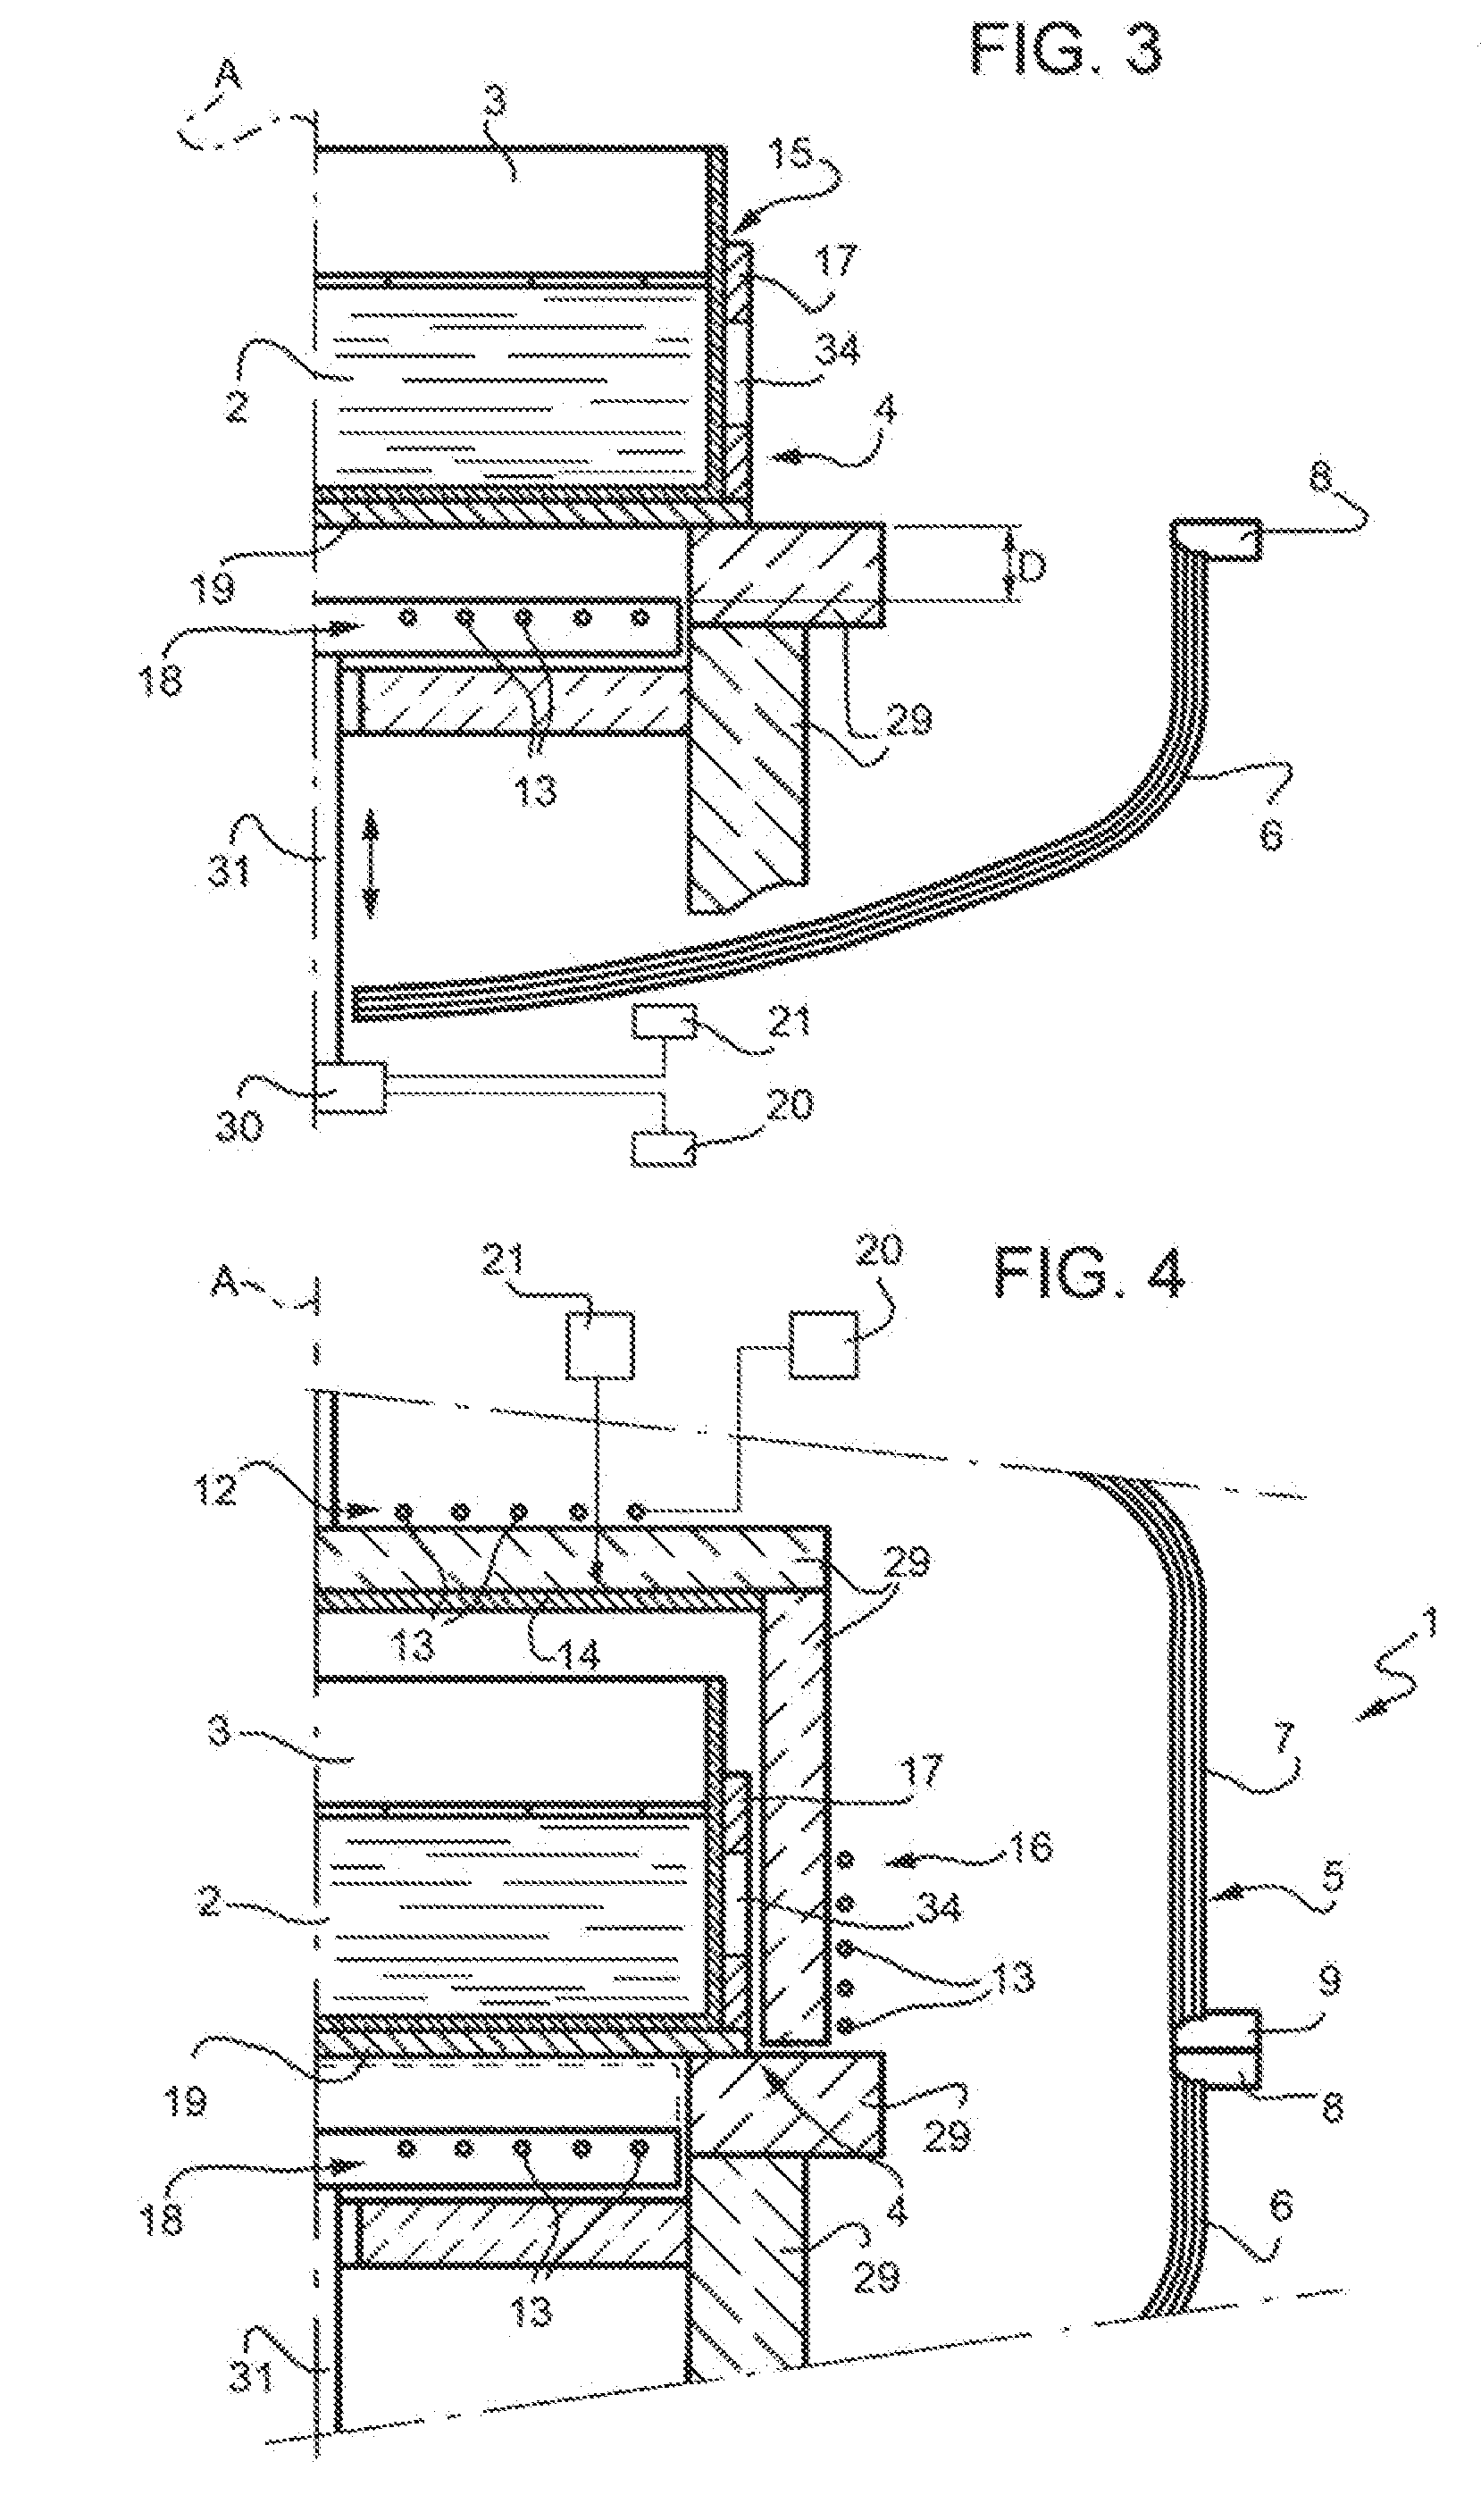 Method and device for obtaining a multicrystalline semiconductor material, in particular silicon